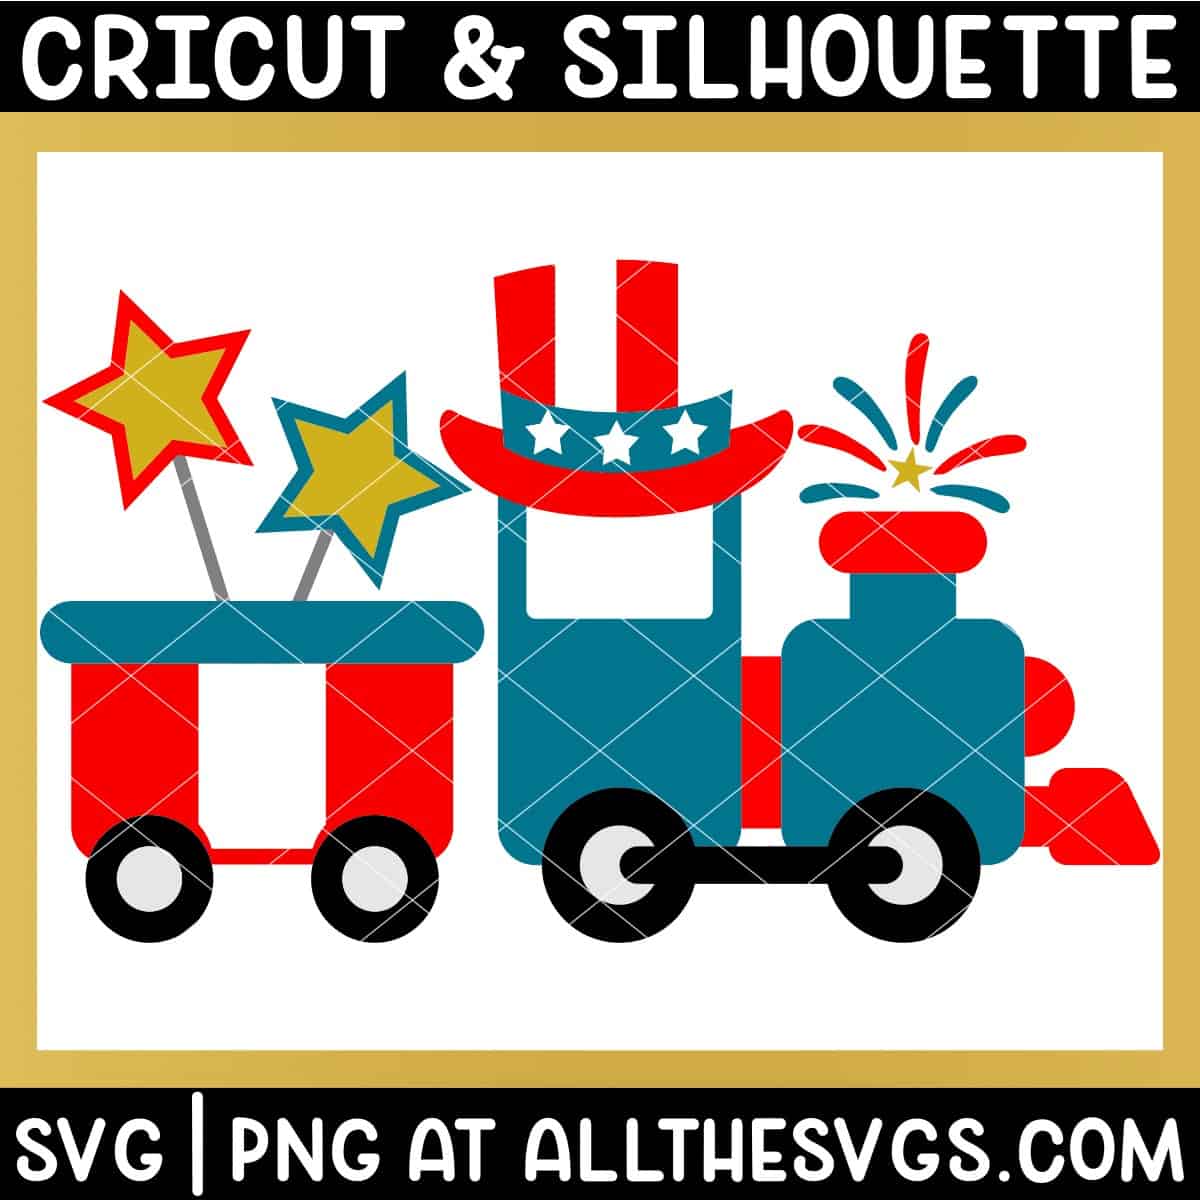 july 4 train svg file with star sparkers, fireworks, uncle sam hat for boys.